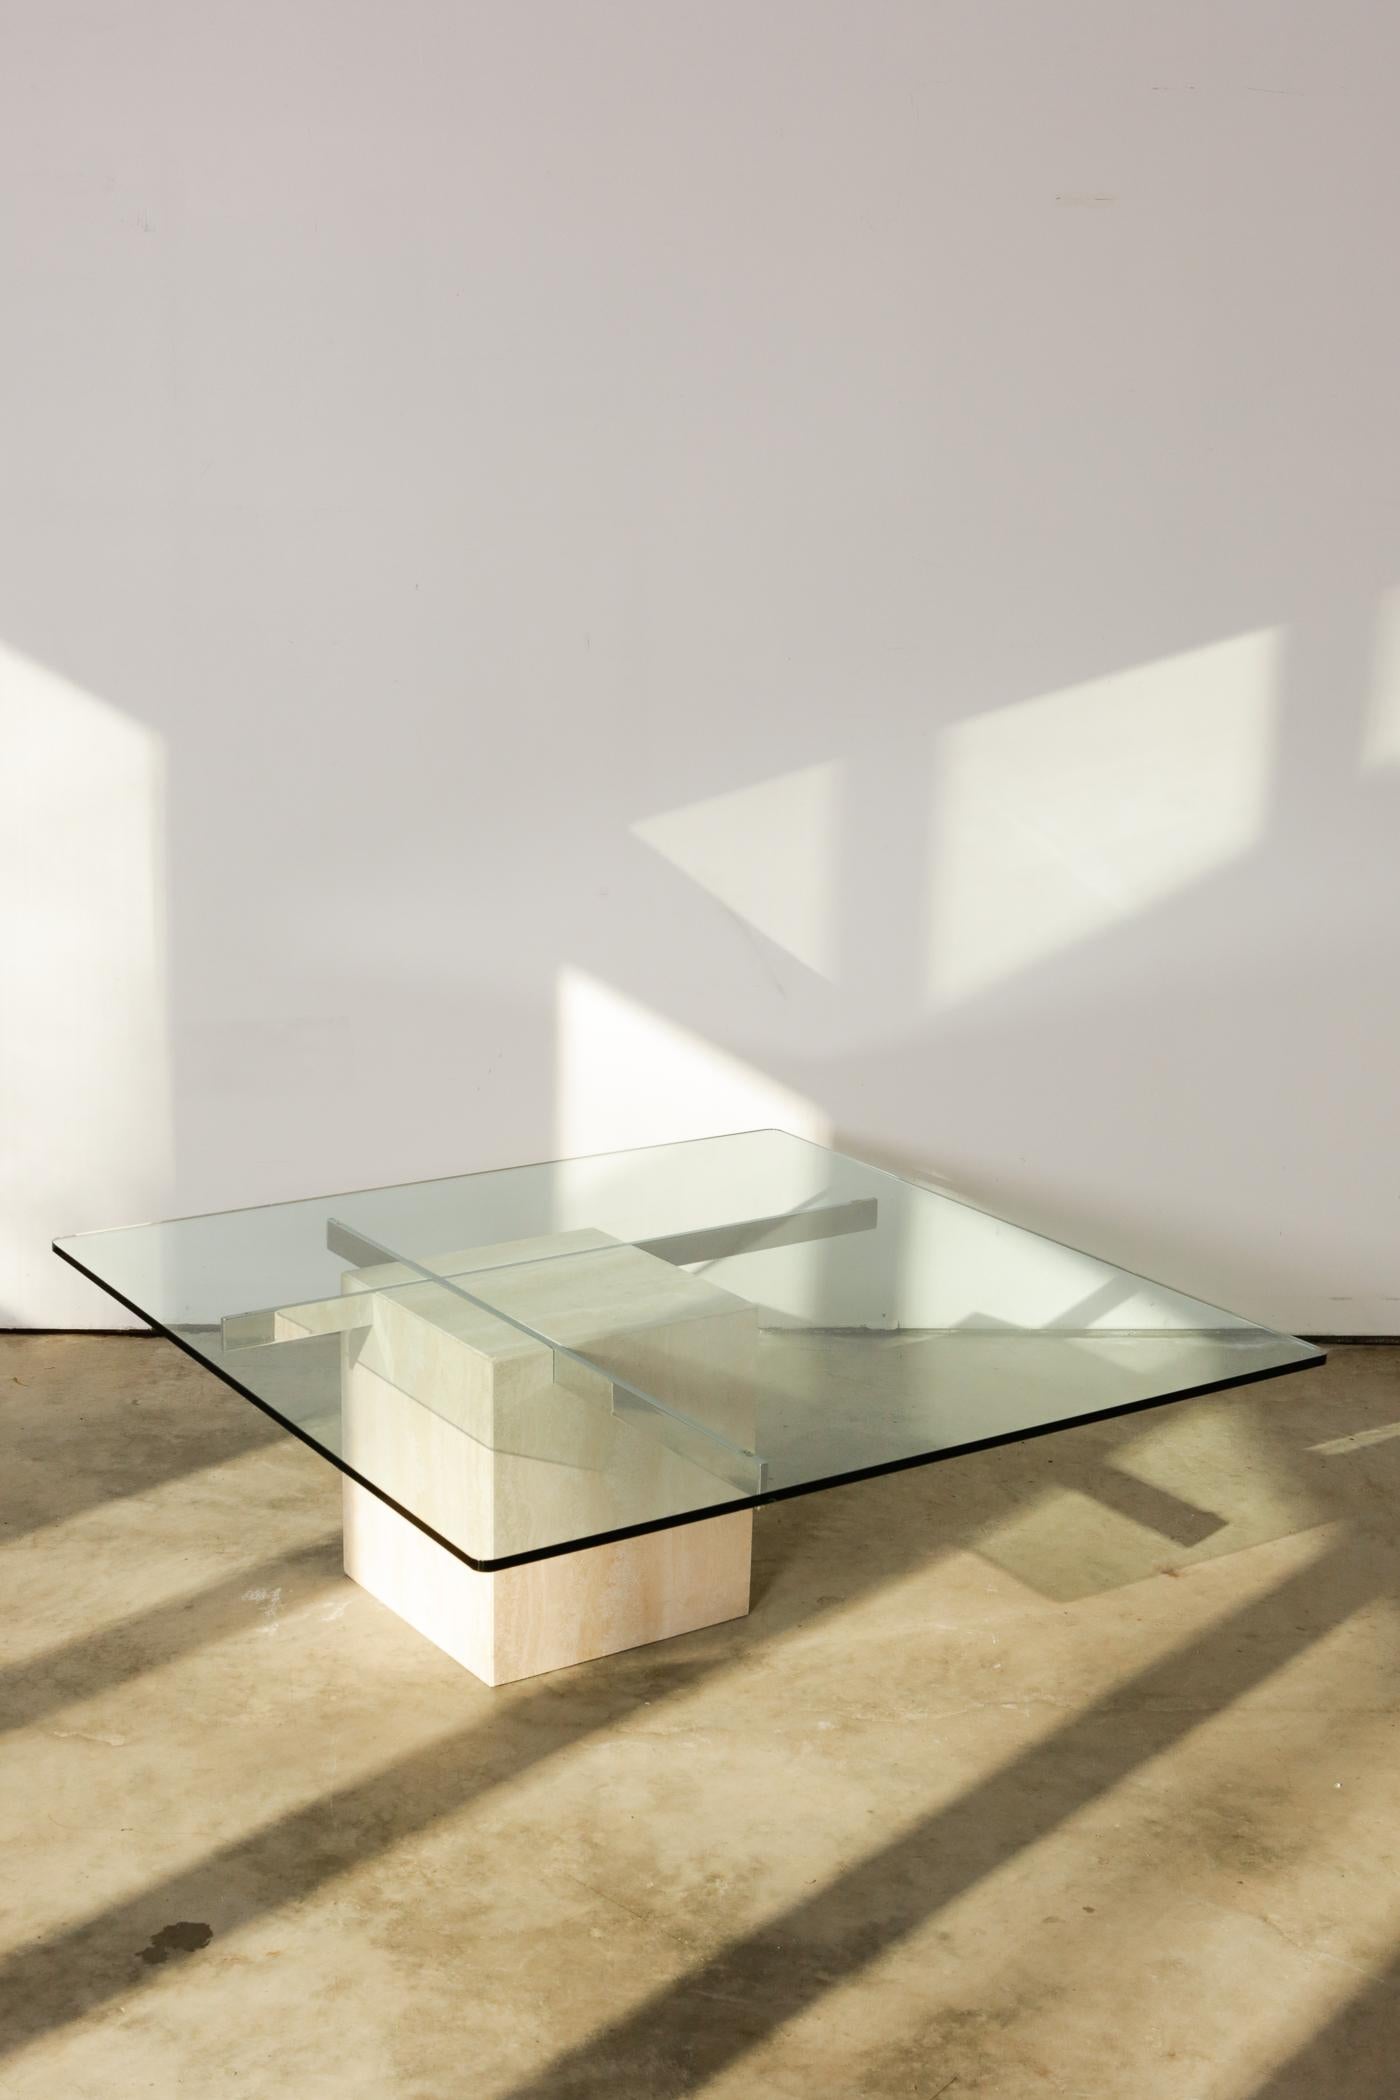 Italian Artedi travertine and chrome coffee table. This is a rare guy. Artedi usually uses brass for their travertine-and-glass combinations, but here we’ve got chrome. And we love it. The silvery shine elevates the warmer travertine stone just a